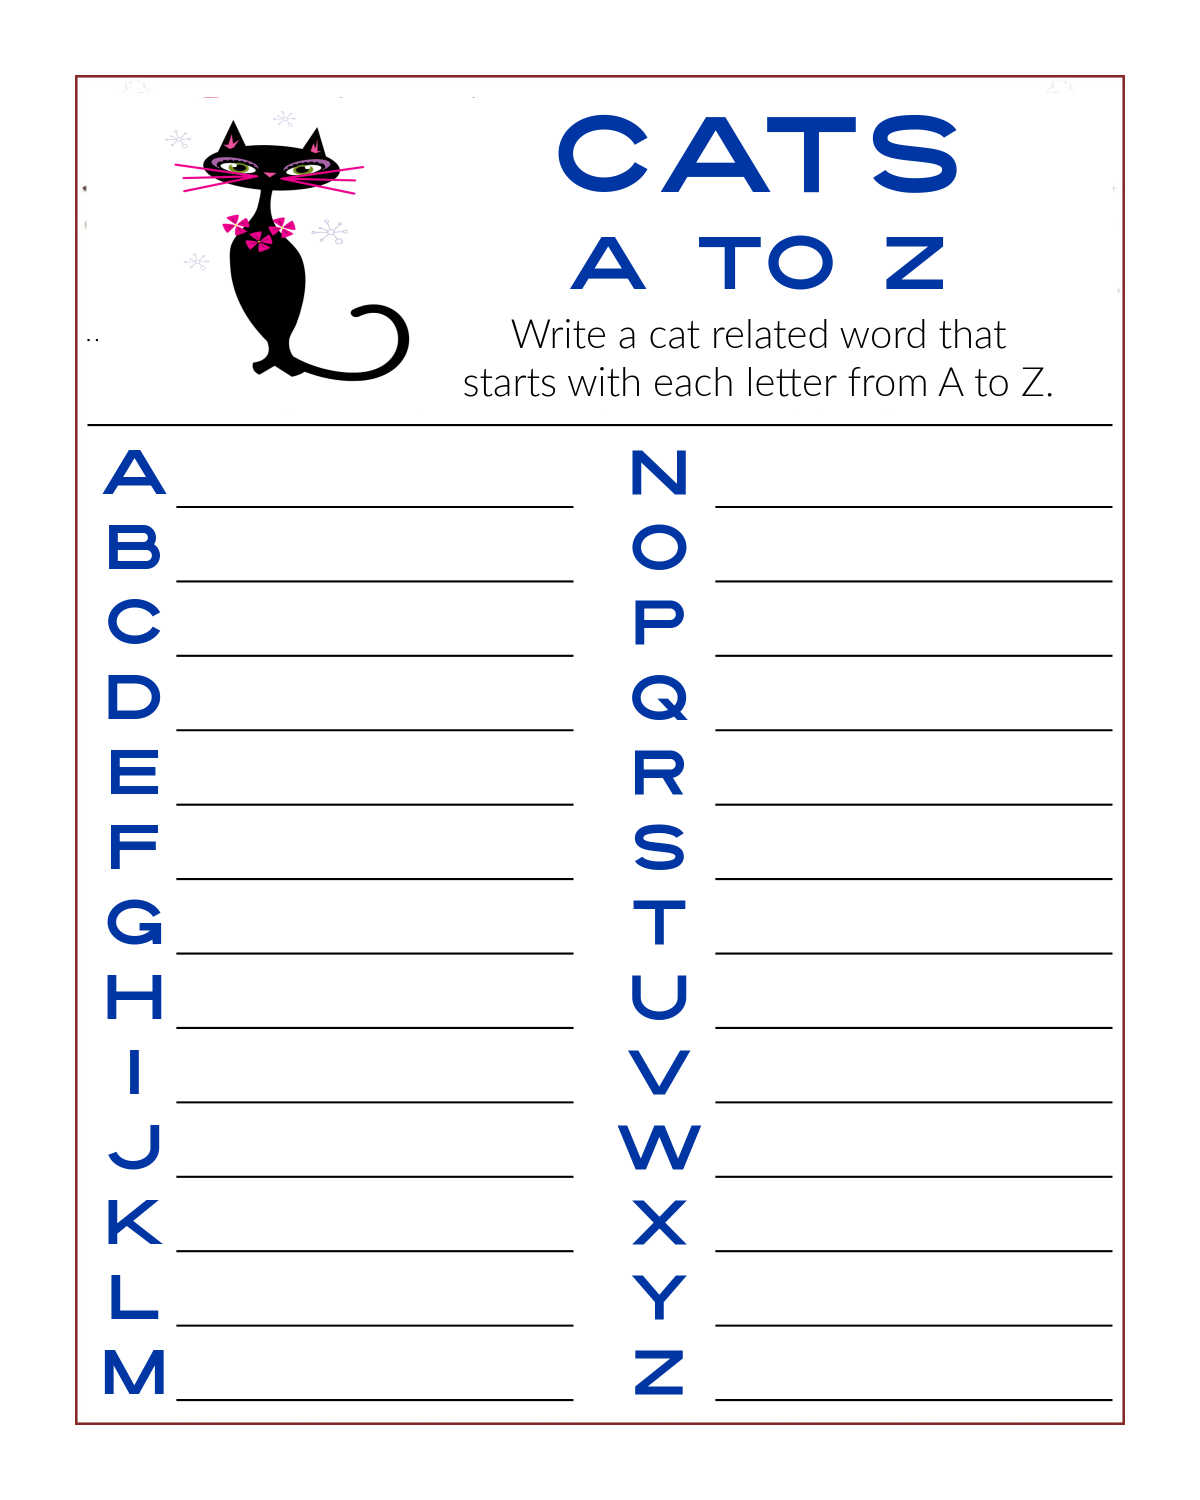 Free Printable A to Z Cat Word Activity Page - Mama Likes This